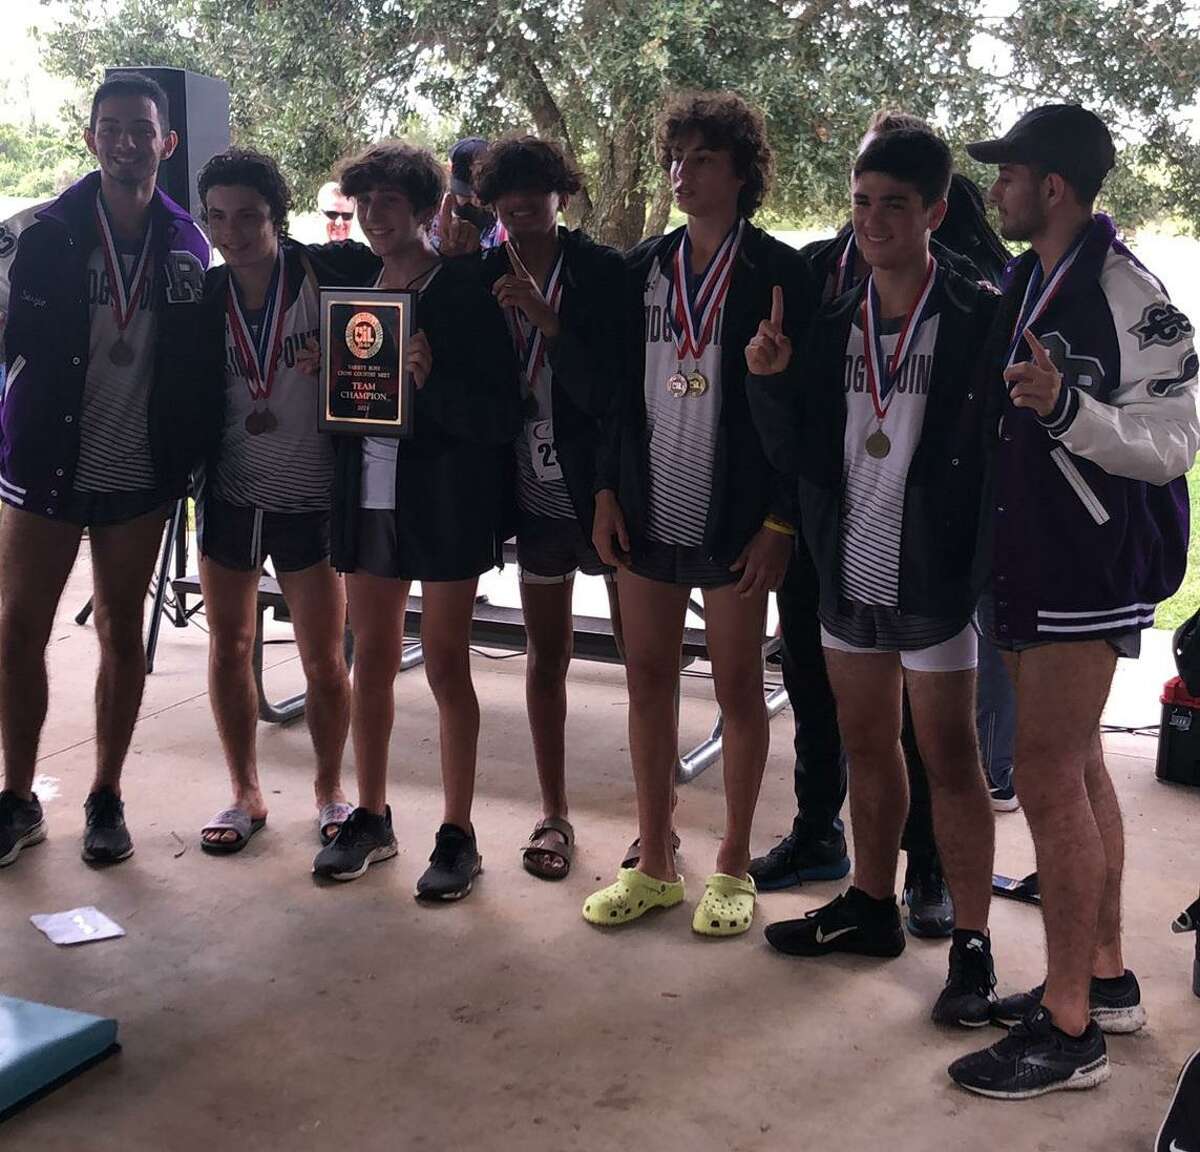 The Ridge Point boys cross country team of Andrew Blake, Charles Blake, Jesus Rojas, Sergio Rojas, Conner Kubycheck, Lukah Shah and Christian Devenish won the District 20-6A championship.